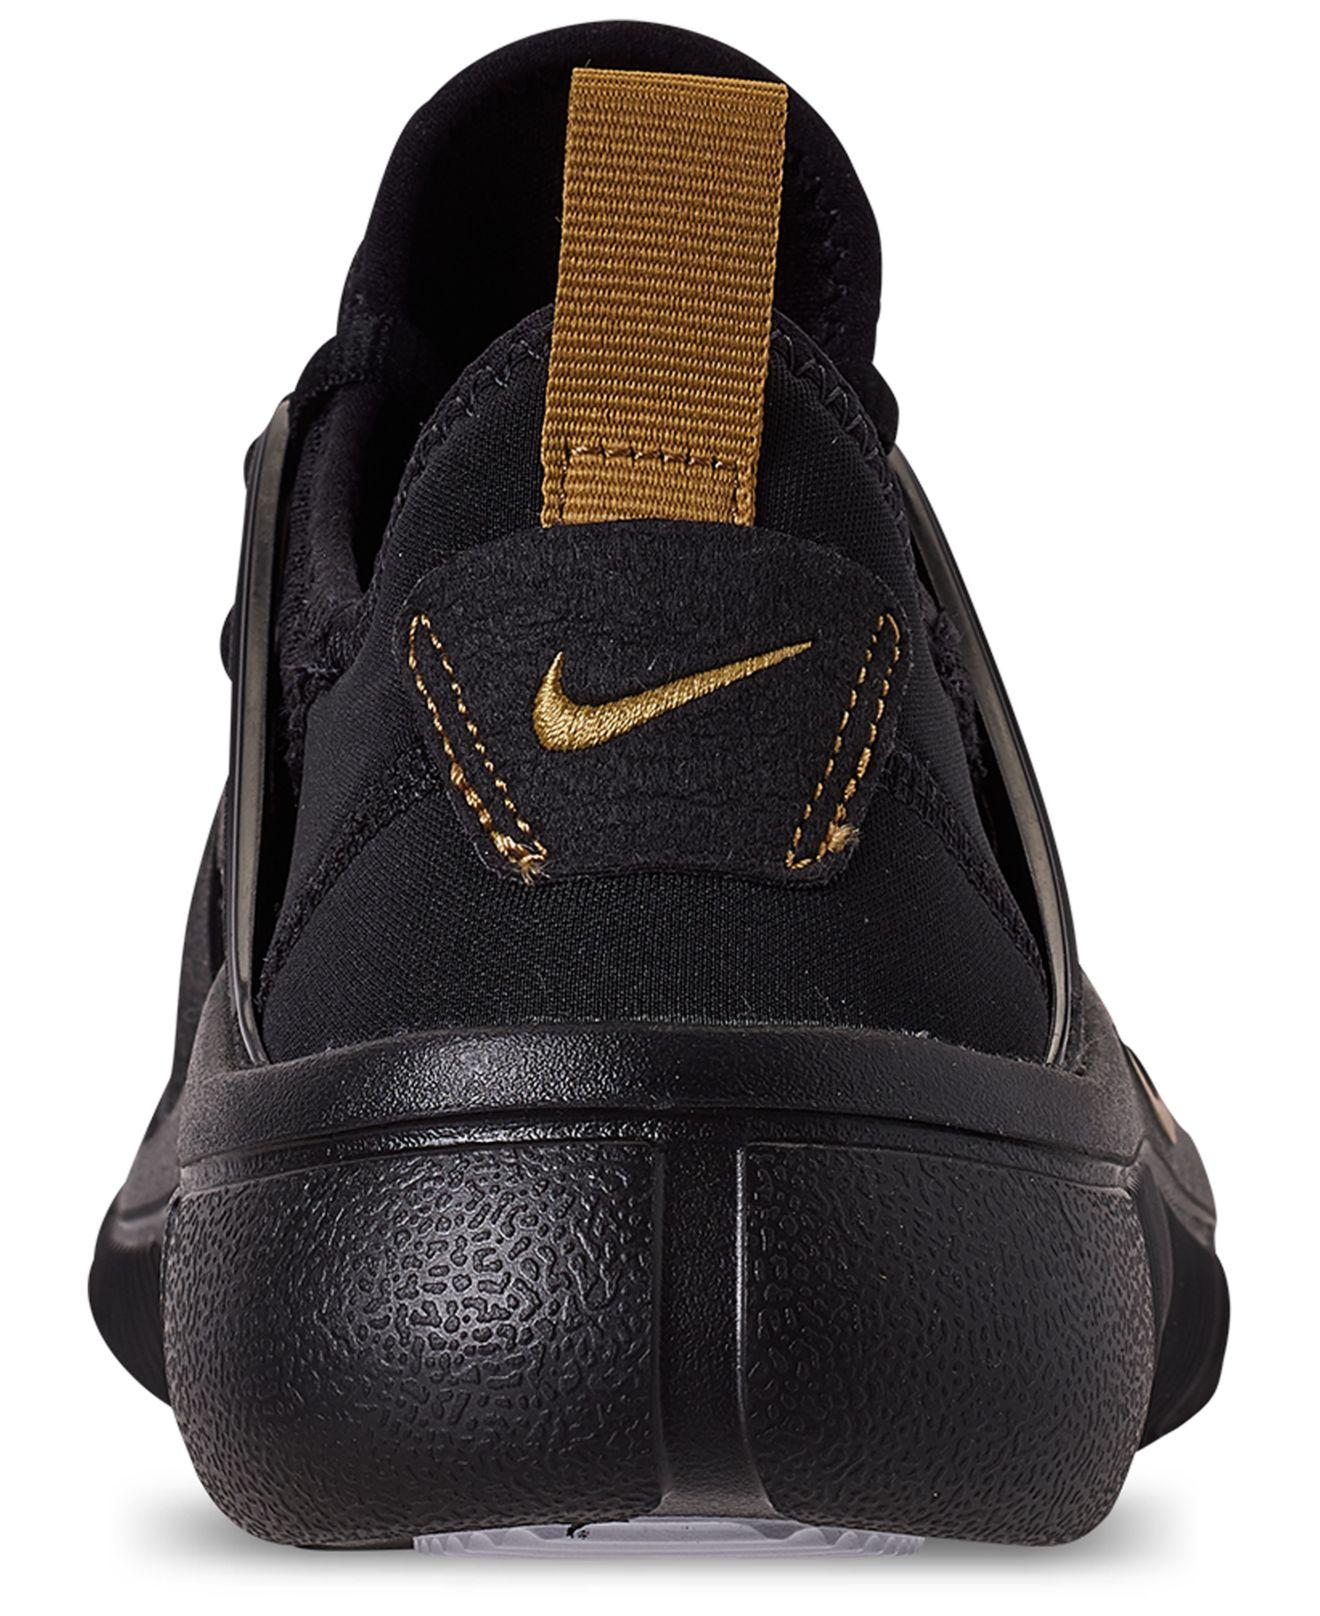 nike acalme black and gold